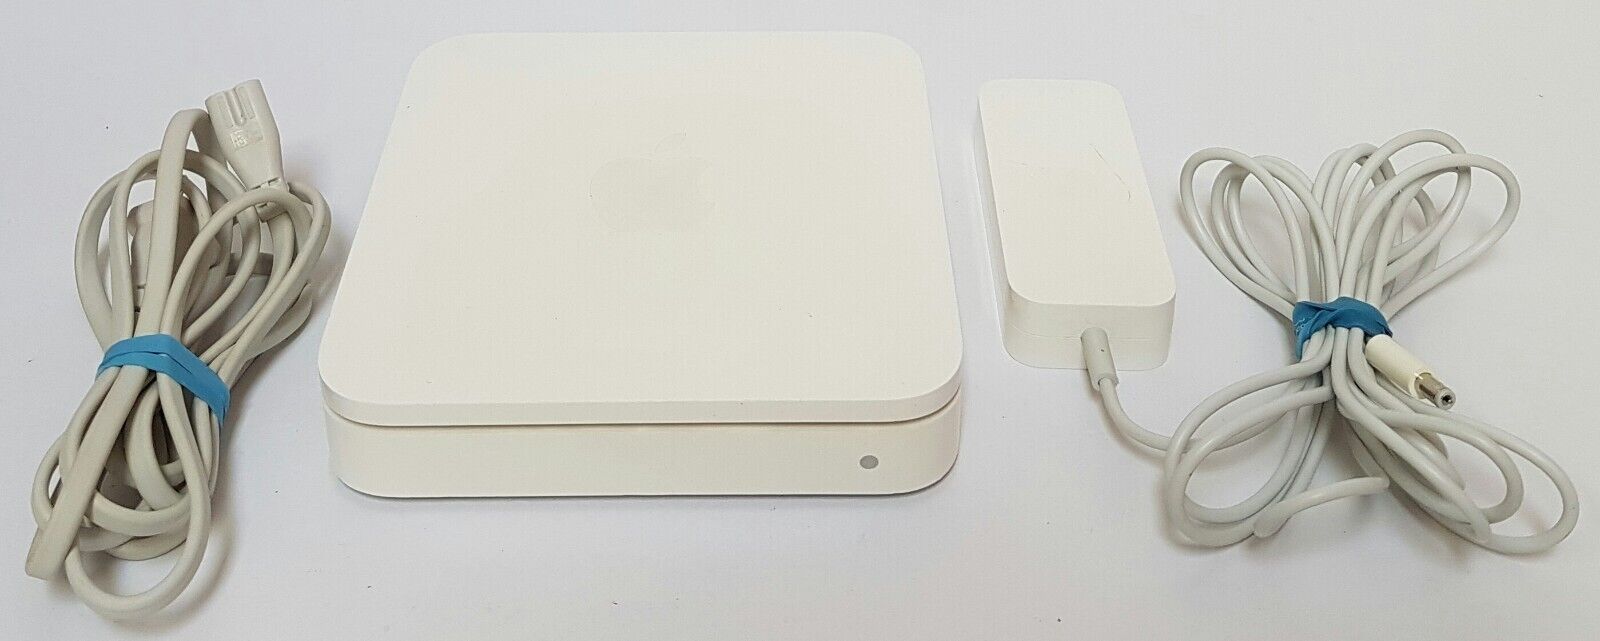 Apple Wireless A1143 Airport Express Wi-Fi Router Base Station Extreme W/ A1202